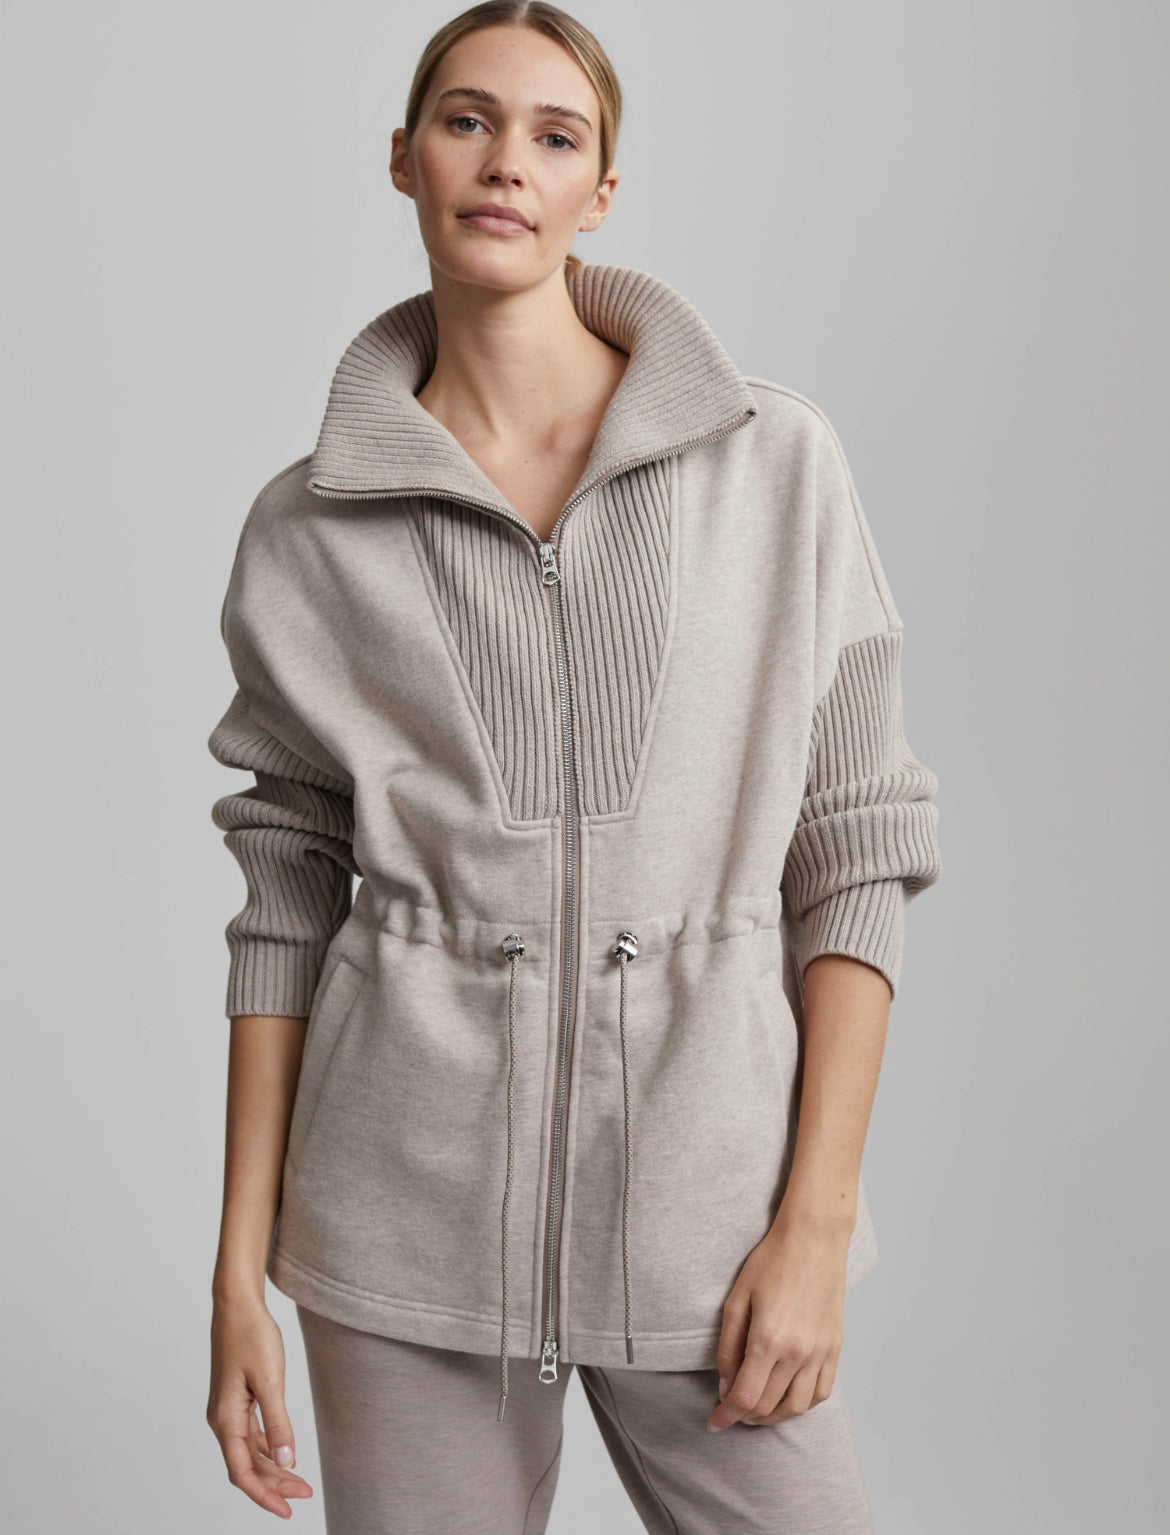 Cotswold Longline Zip Jacket in Taupe Marl – Kirk and Vess